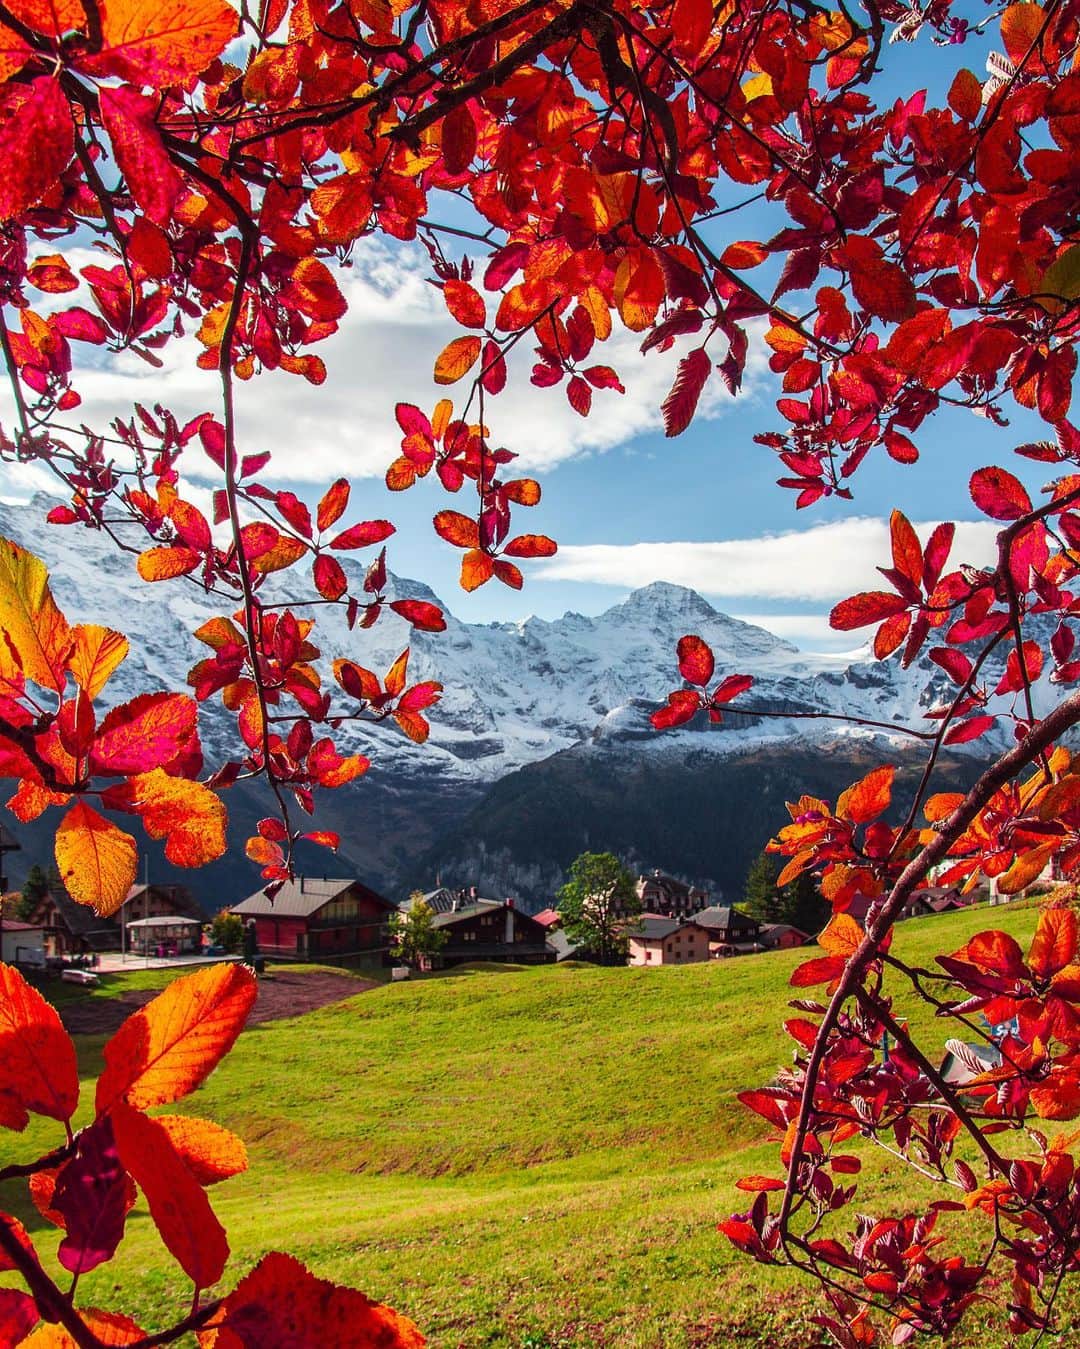 Hatice Korkmaz The Color Queenのインスタグラム：「Car-free village Mürren😍🍁🍂🧡 @murrengimmelwald i am so happy that i have a chance to visit again all these cute villages this time in autumn colours #murren #jungfrauregion #switzerland #nature #autumn #love #colors」